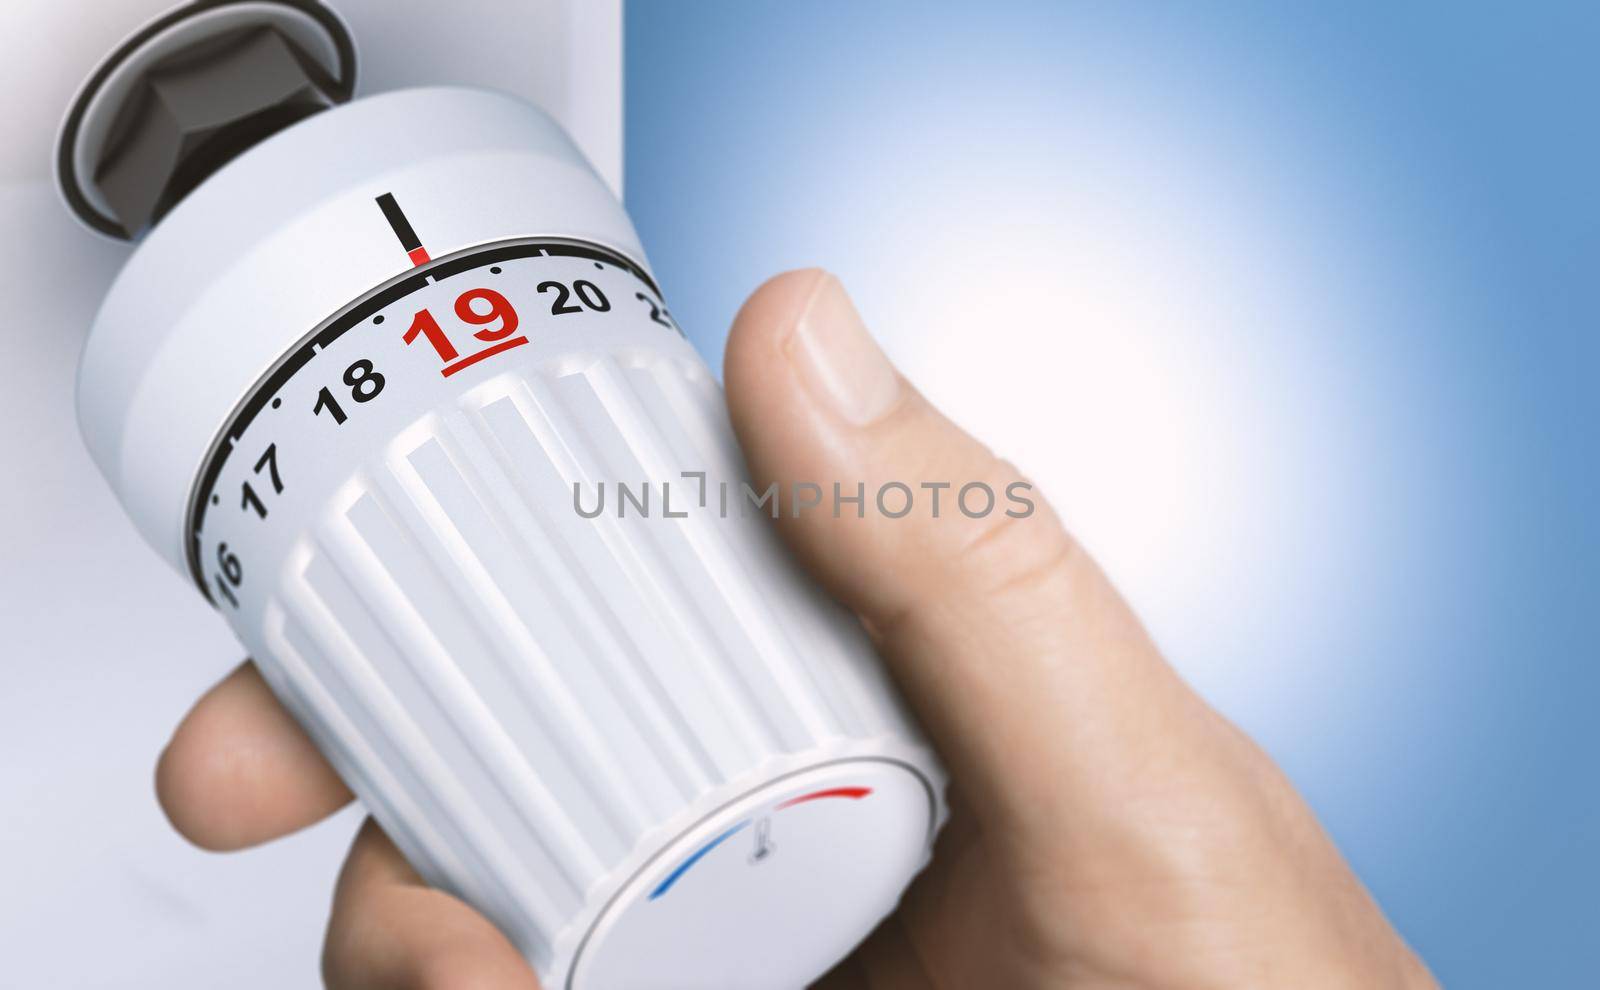 Man reducing energy consumption by setting thermostat temperature to 19 degrees. Close up on a knob. Composite image between a 3d illustration and a hand photography.